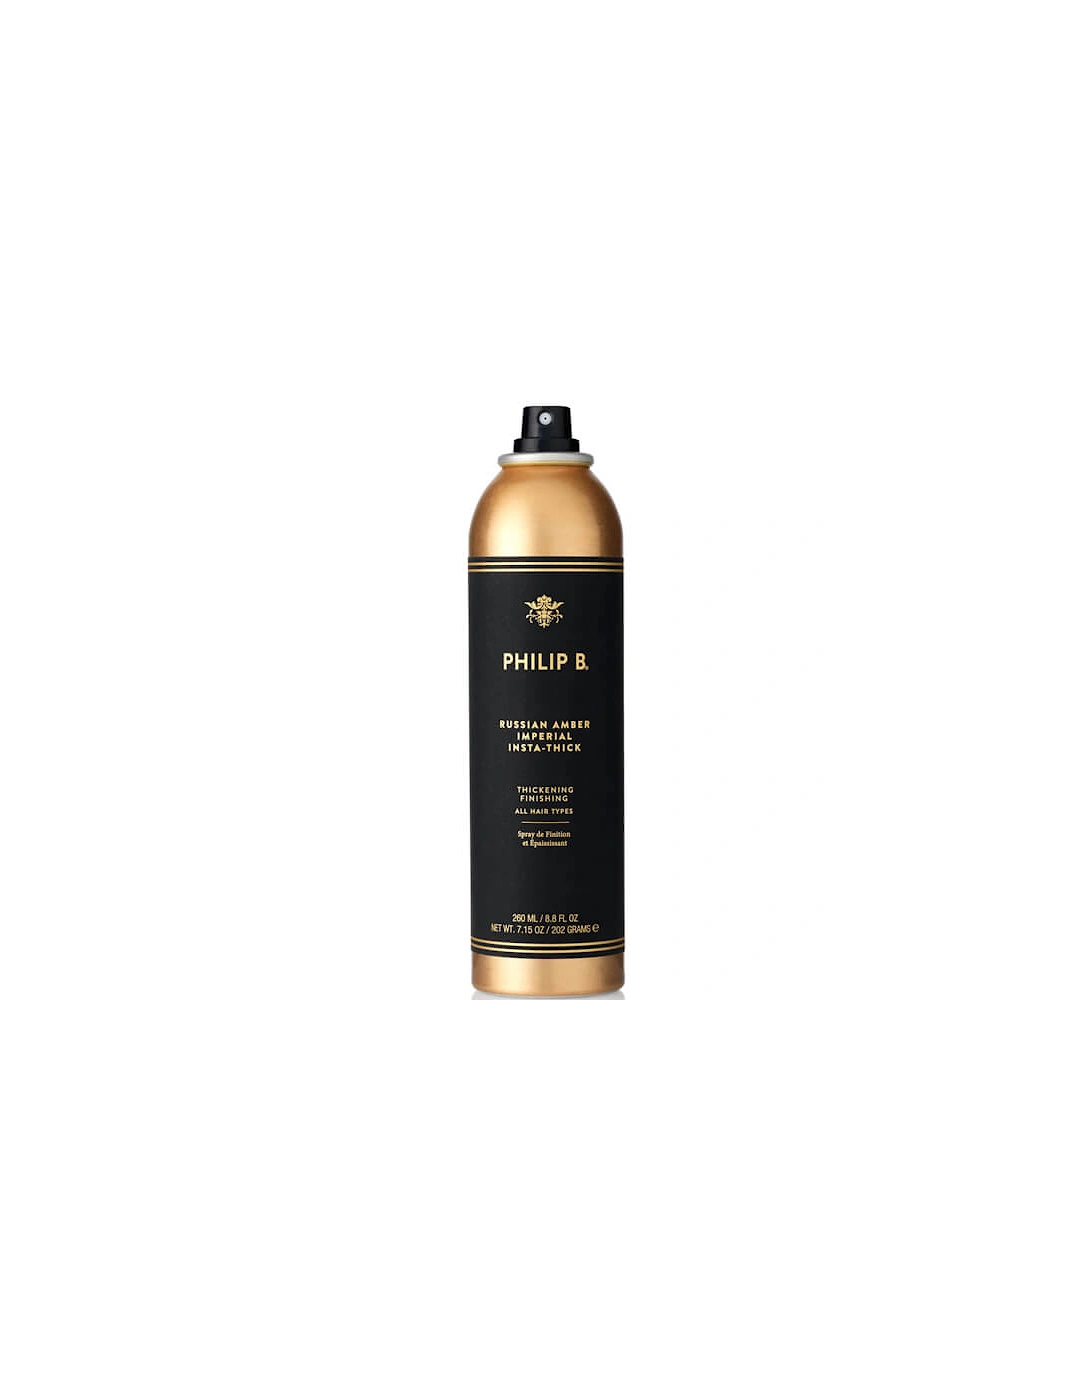 Russian Amber Imperial Insta-Thick Hair Spray (260ml), 2 of 1